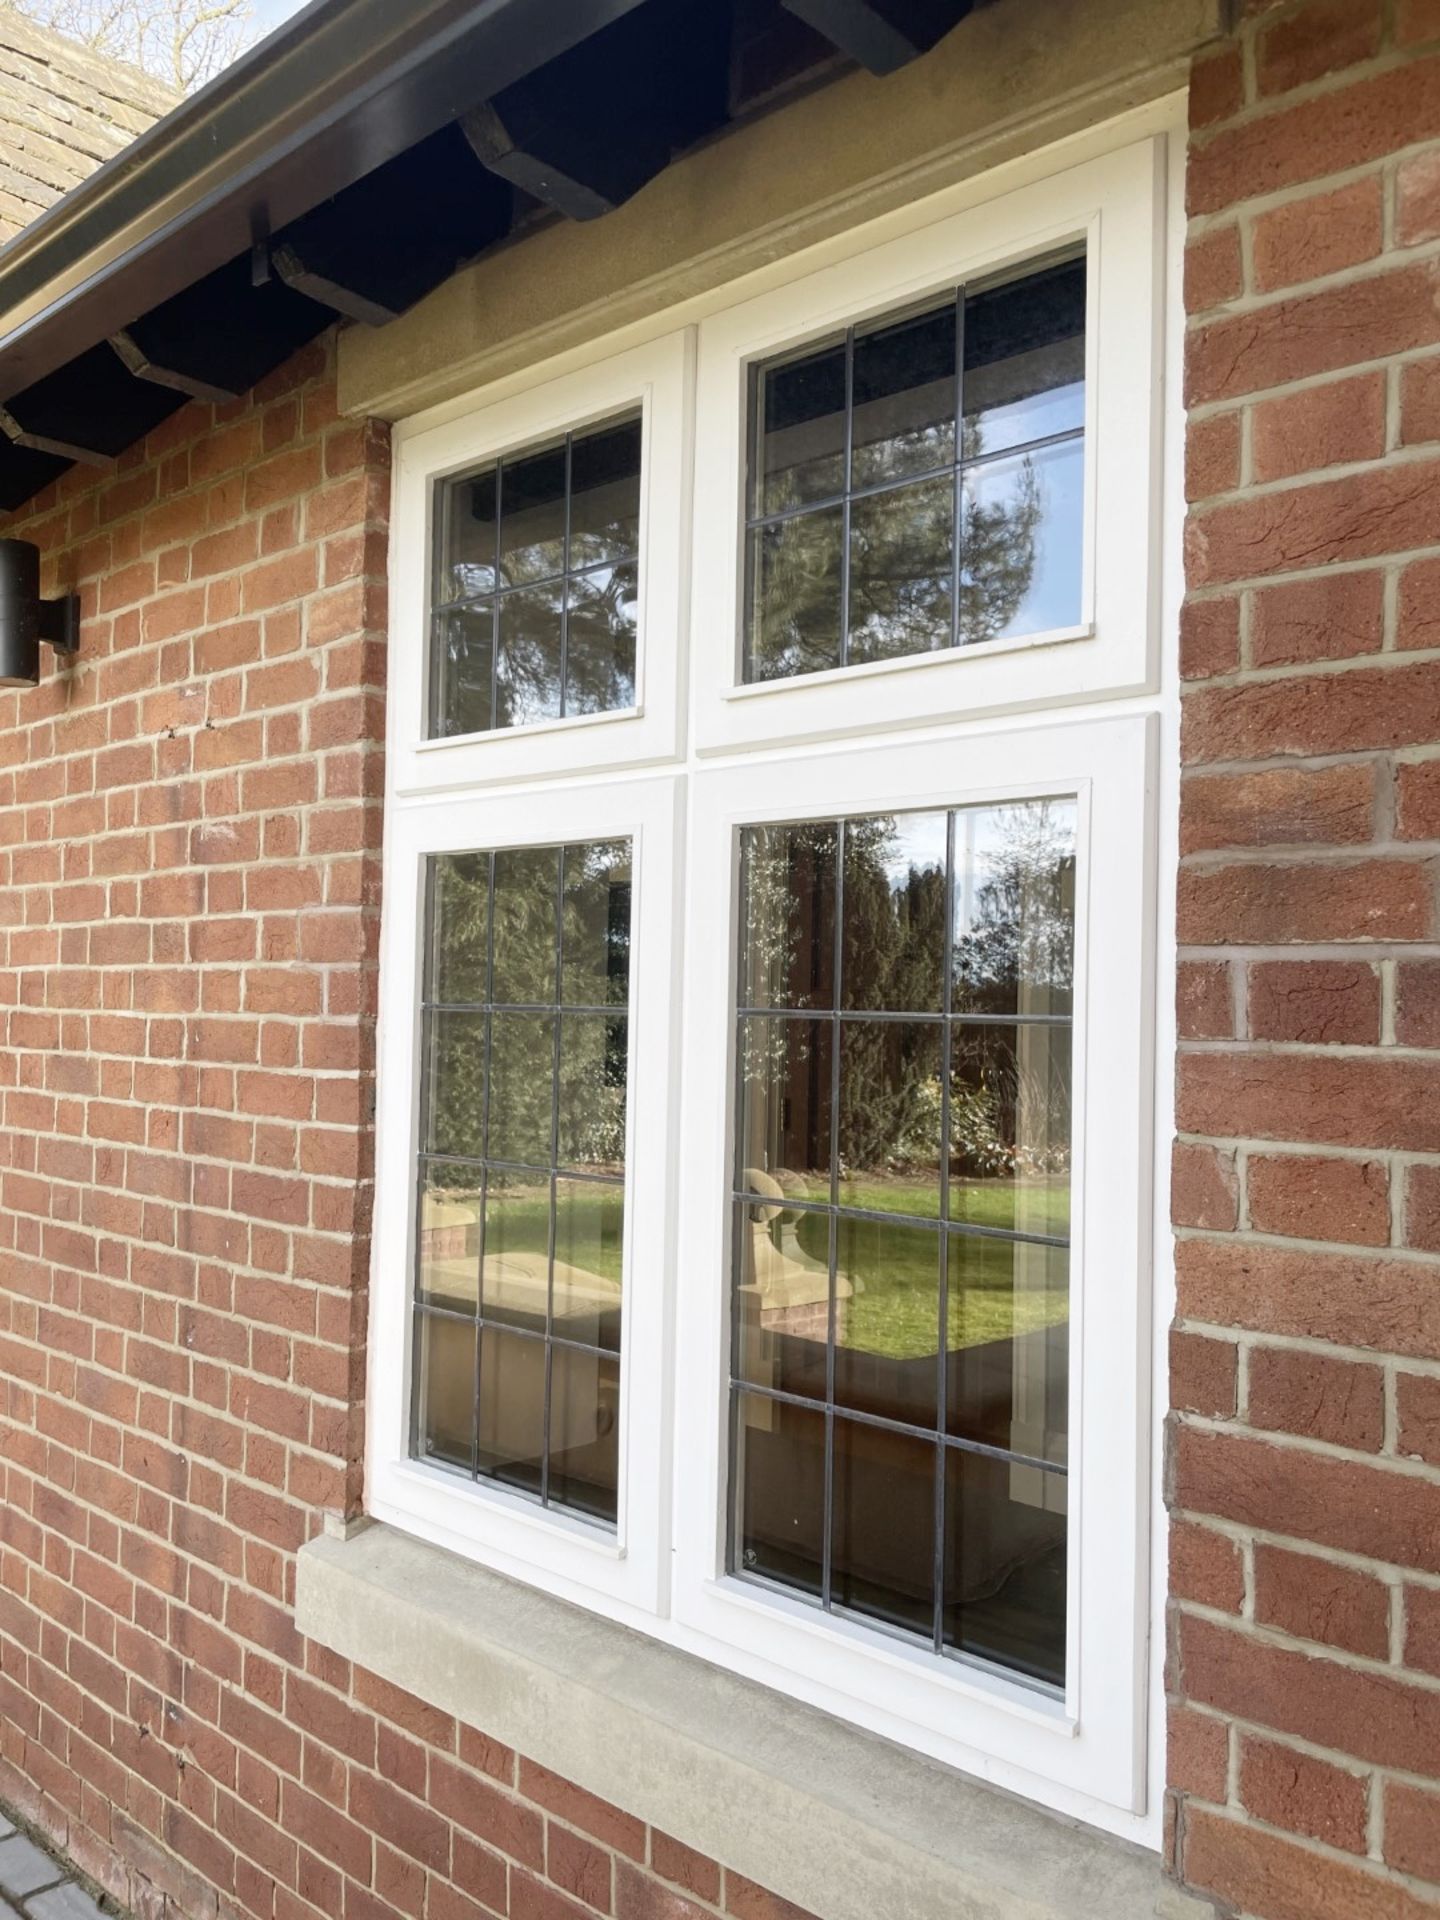 1 x Hardwood Timber Double Glazed Window Frame - Ref: PAN207 - CL896 - NO VAT ON THE HAMMER - - Image 3 of 15